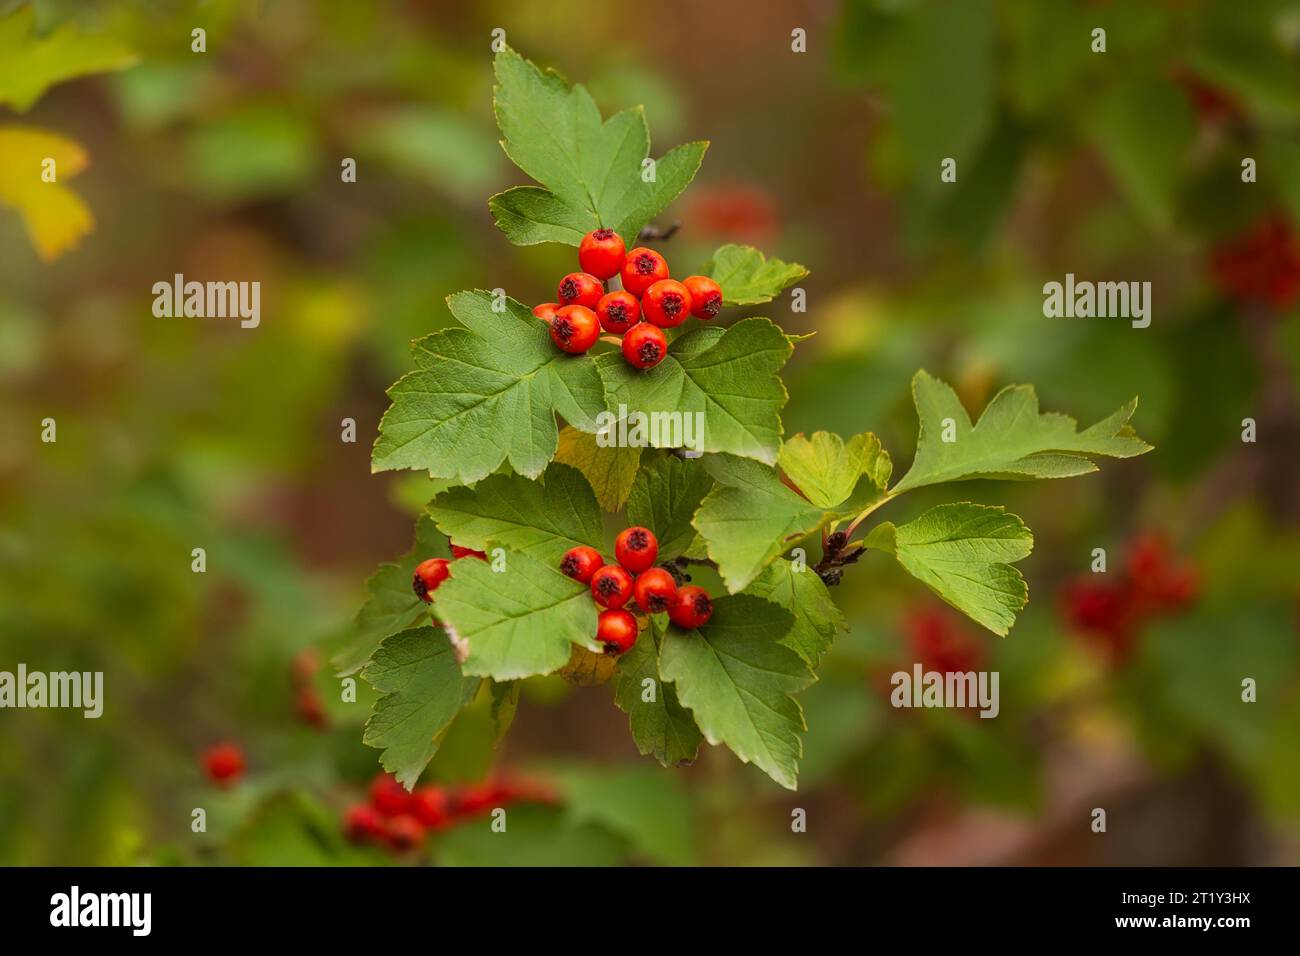 Leaves and fruits of hawthorn close-up with shallow depth of field Stock Photo